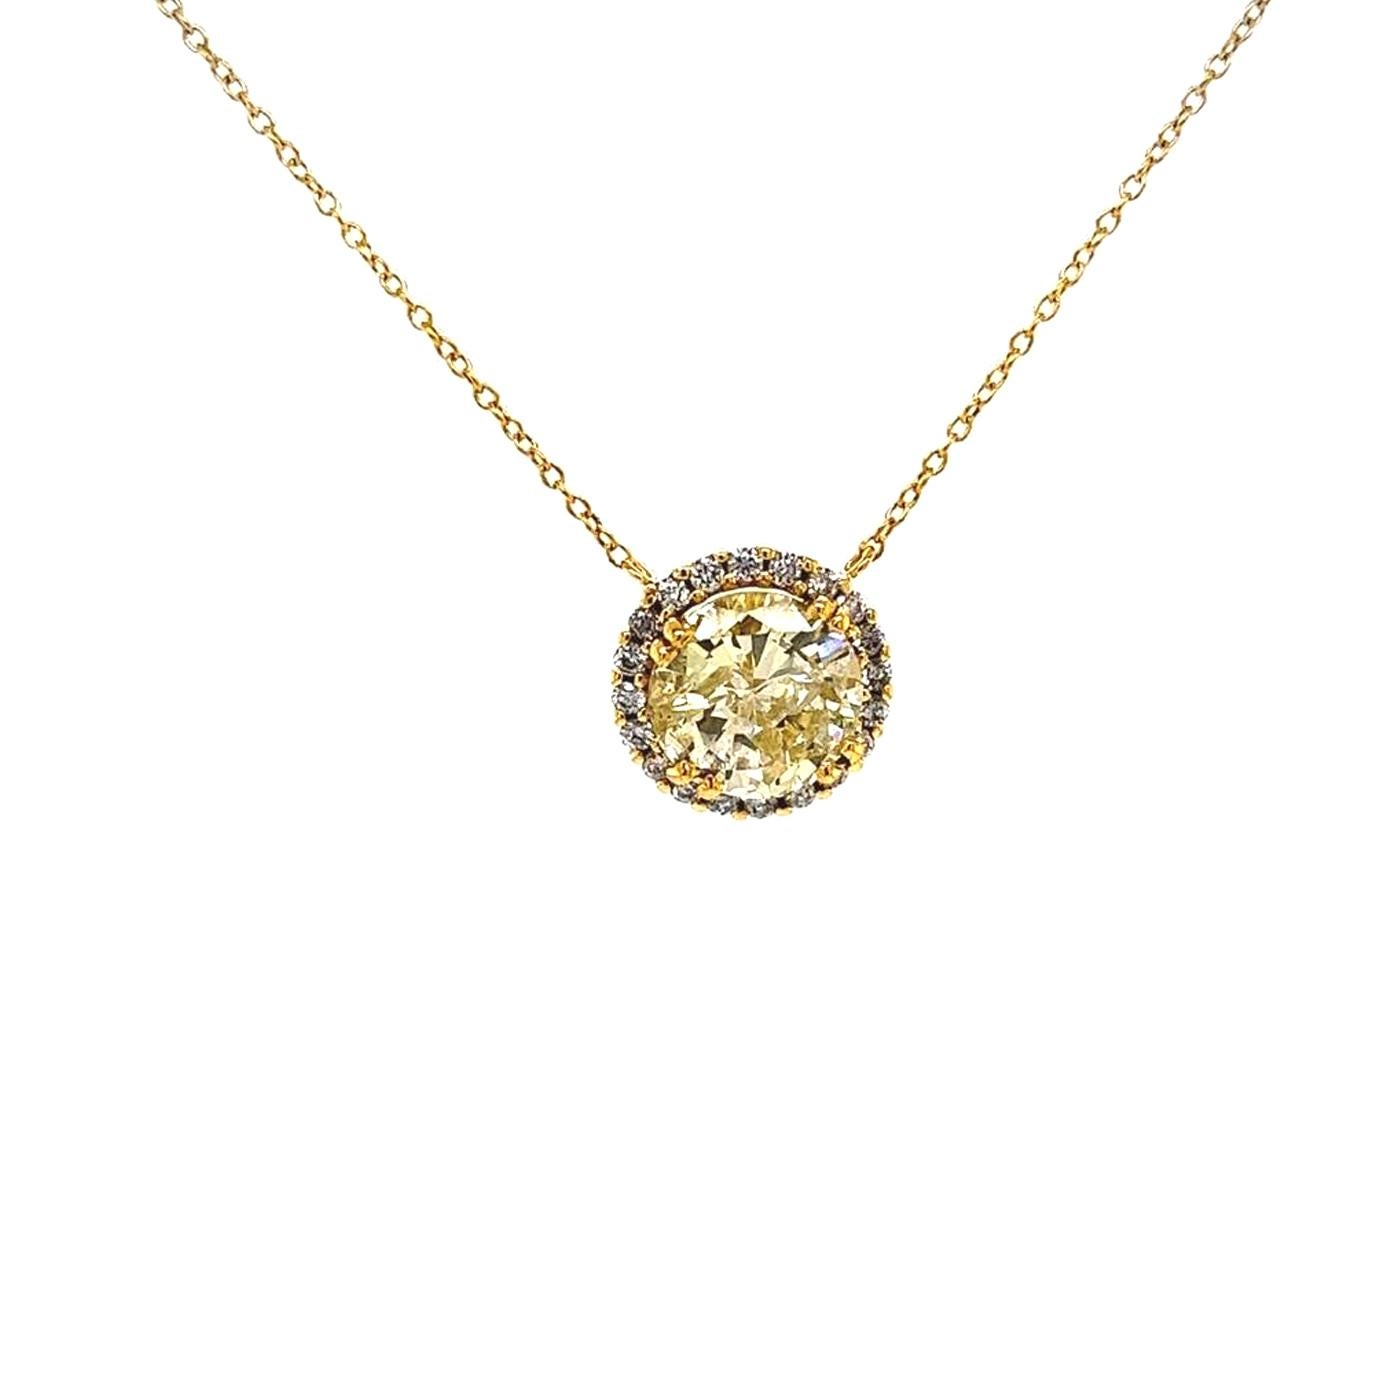 3.15 Carat Natural Fancy Yellow Round Diamond 18K Gold Pendant Halo Necklace In Excellent Condition For Sale In Aventura, FL